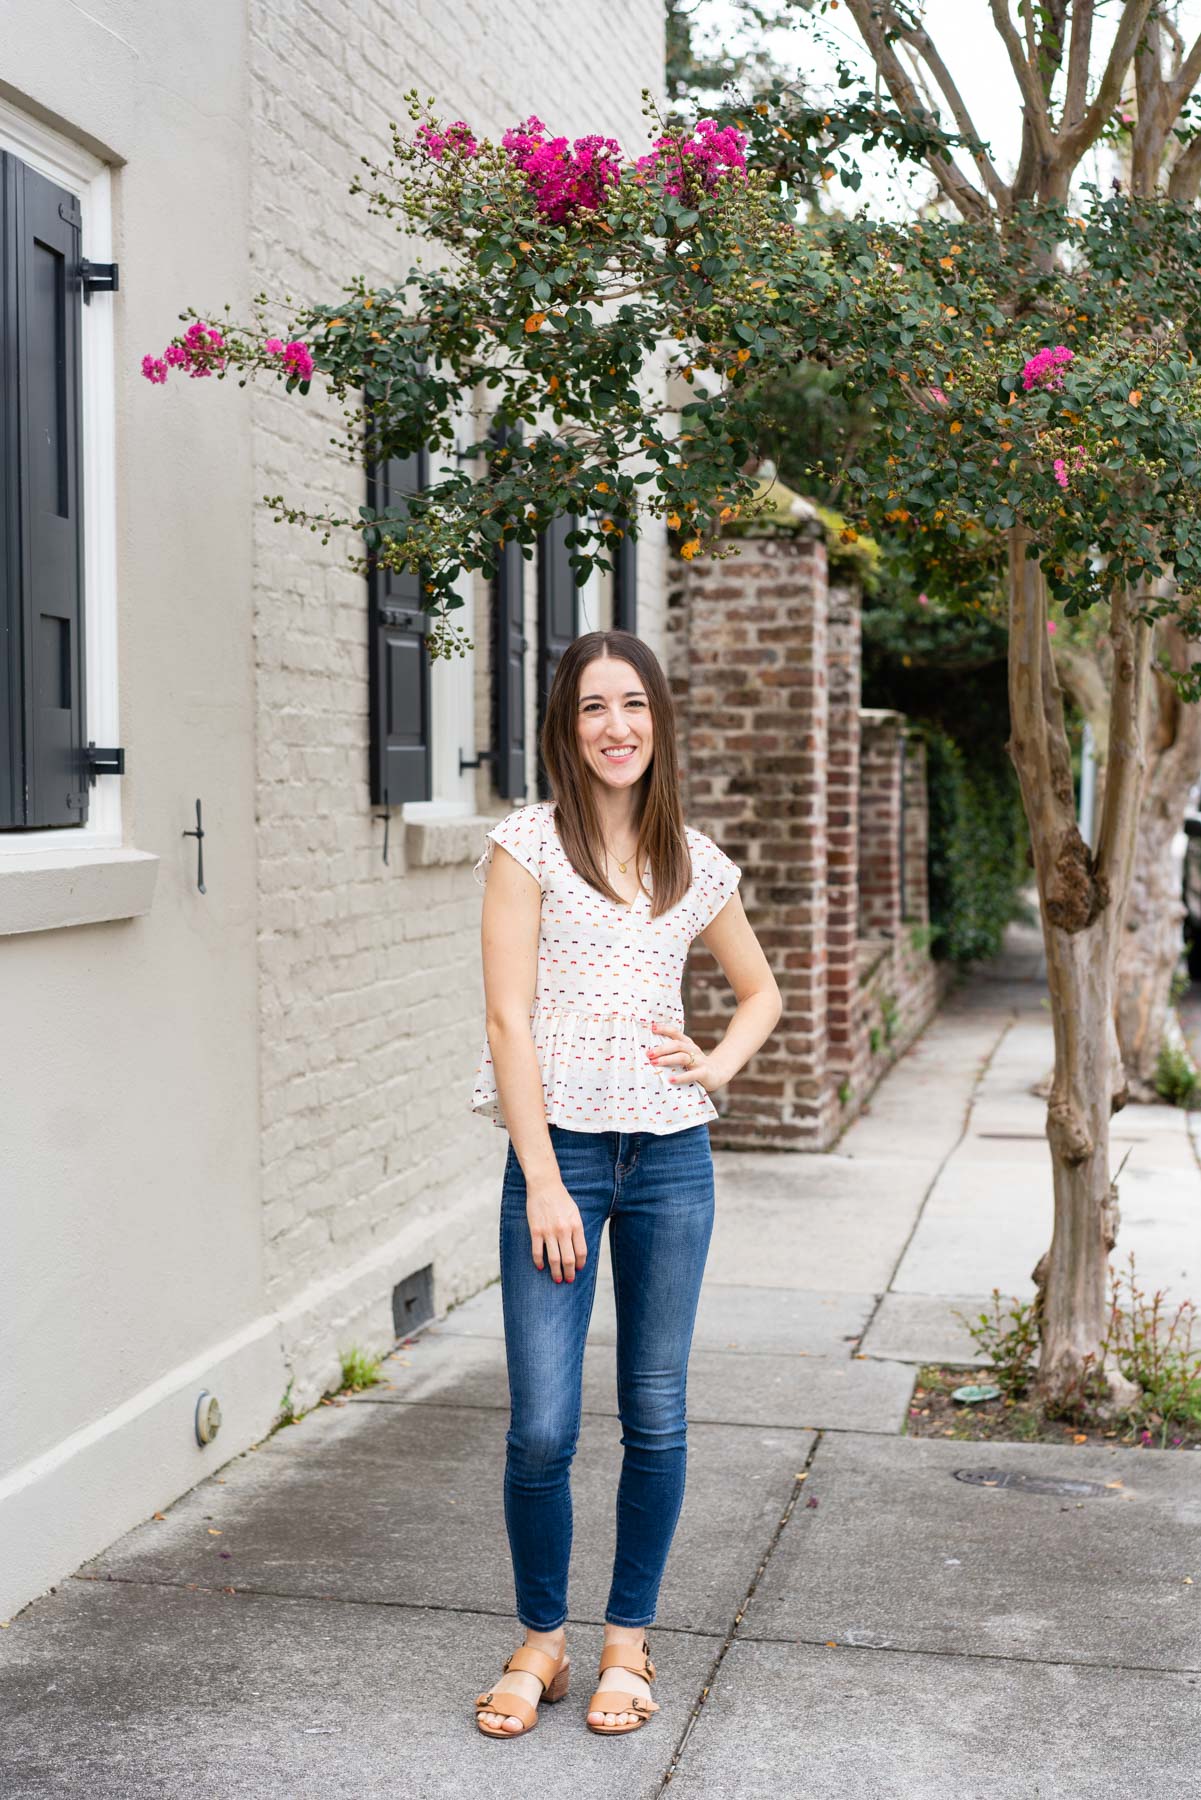 Woman in denim jeans and a white blouse demonstrating how to pose for a photoshoot by placing one hand on her hip and smiling naturally at the camera